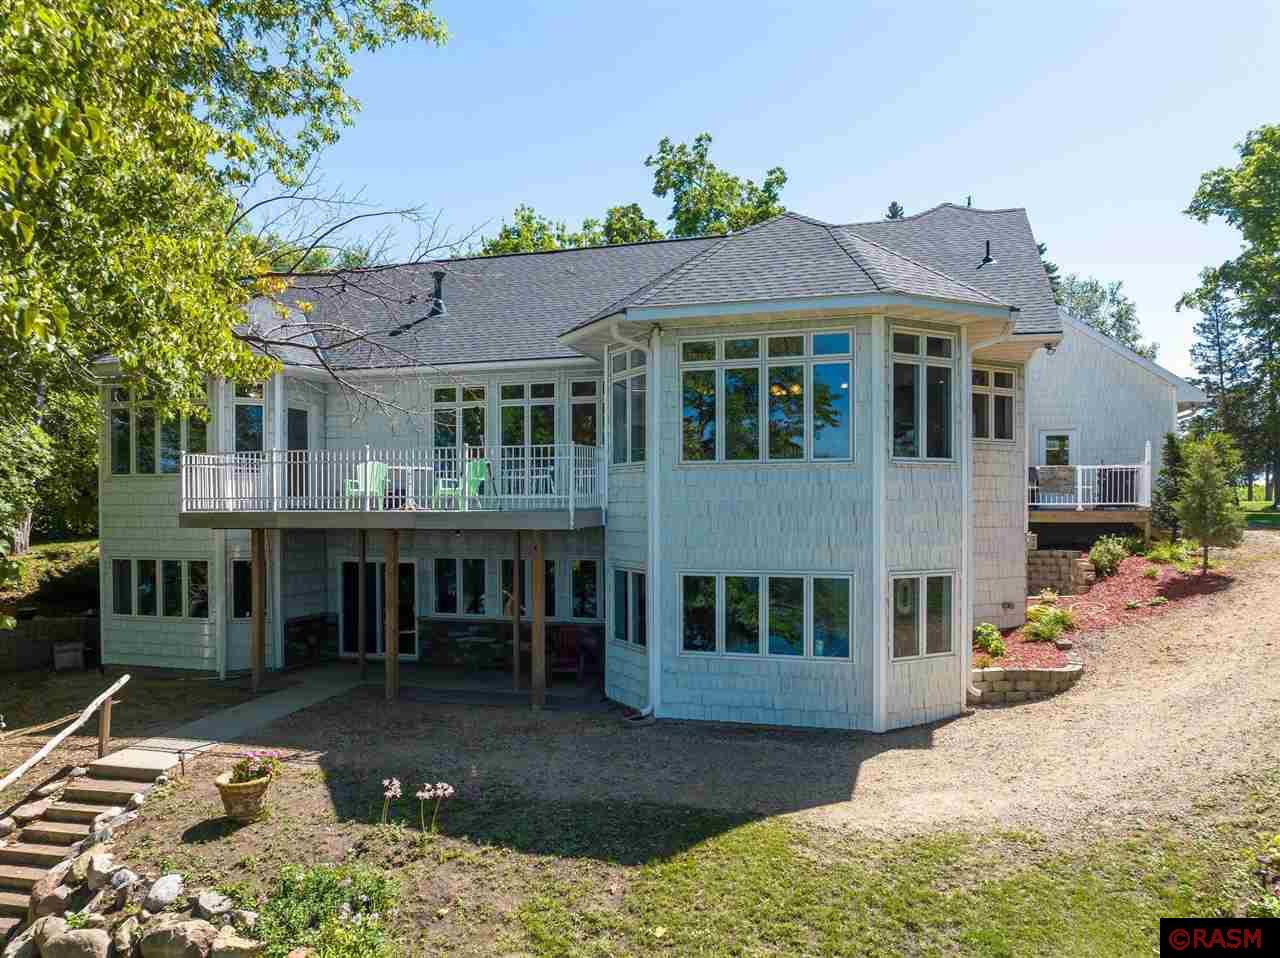 First time on the market - this stunning 5-bedroom, 4-bath home with nearly 250-feet of shoreline is a must see! An impressive amount of windows  overlooking the lake make this home bright and airy all year around. Main level open concept living, kitchen and dining areas with gas fireplace and polished hardwood floors. Butler's pantry, laundry/mudroom area to the rear of the kitchen leads to the attached 3-stall garage. Large walk-up unfinished loft with loads of natural light above the garage offers exciting potential.  The opposite wing of the main level consists of Owner's suite, guest bedroom and guest bath.  Lower level is equipped with heated and stained concrete flooring with three additional bedrooms, full bath and family room with a 2nd gas fireplace.  Stroll out from the family room to the patio and continue on to the well-maintained sandy shoreline with two docks. Potential for a sixth bedroom in the lower level.  There is so much to love about this home - set up your private showing today!